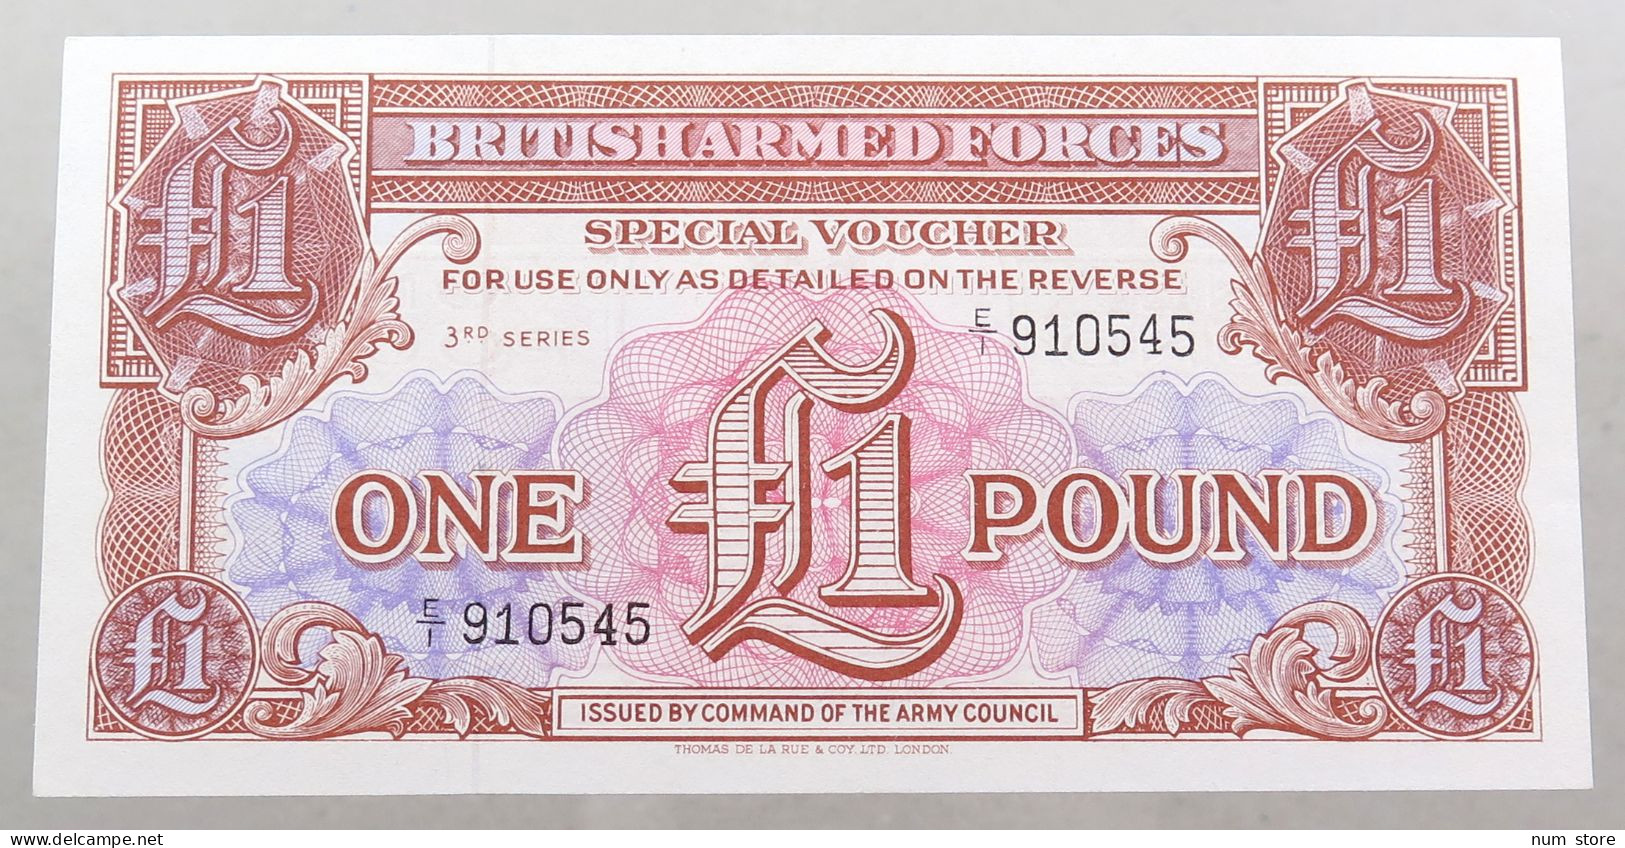 GREAT BRITAIN 1 POUND BRITISH ARMED FORCES TOP #alb049 0195 - British Armed Forces & Special Vouchers